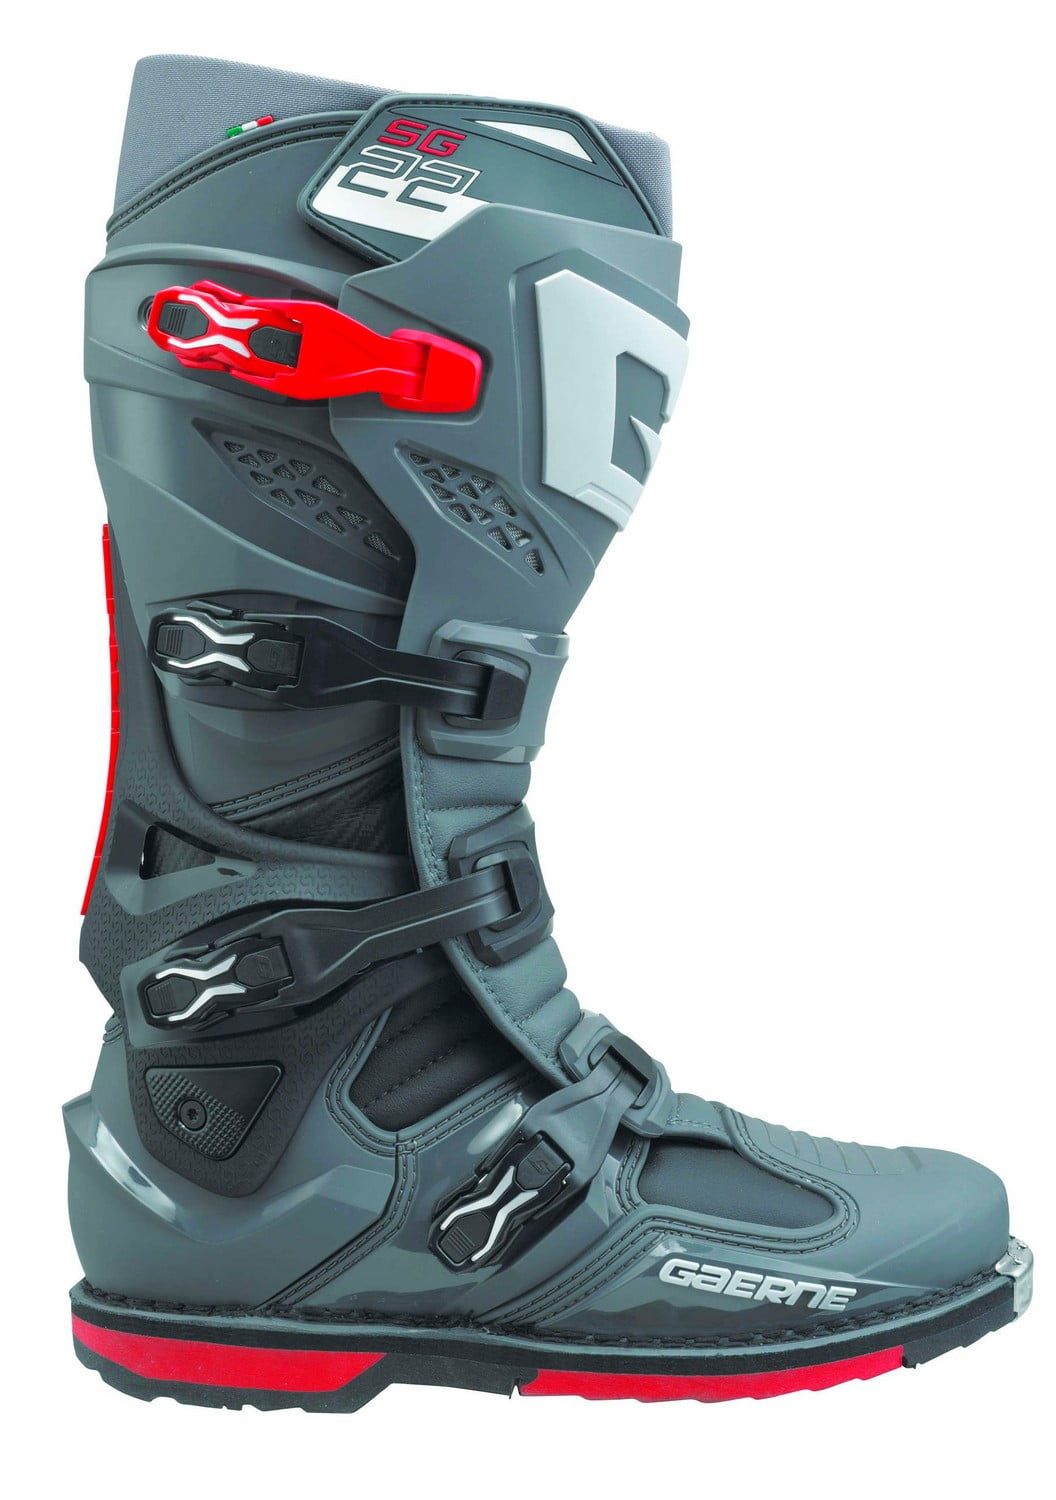 Gaerne SG-22 Mens MX Offroad Boots Anthracite/Black/Red 12 USA ...